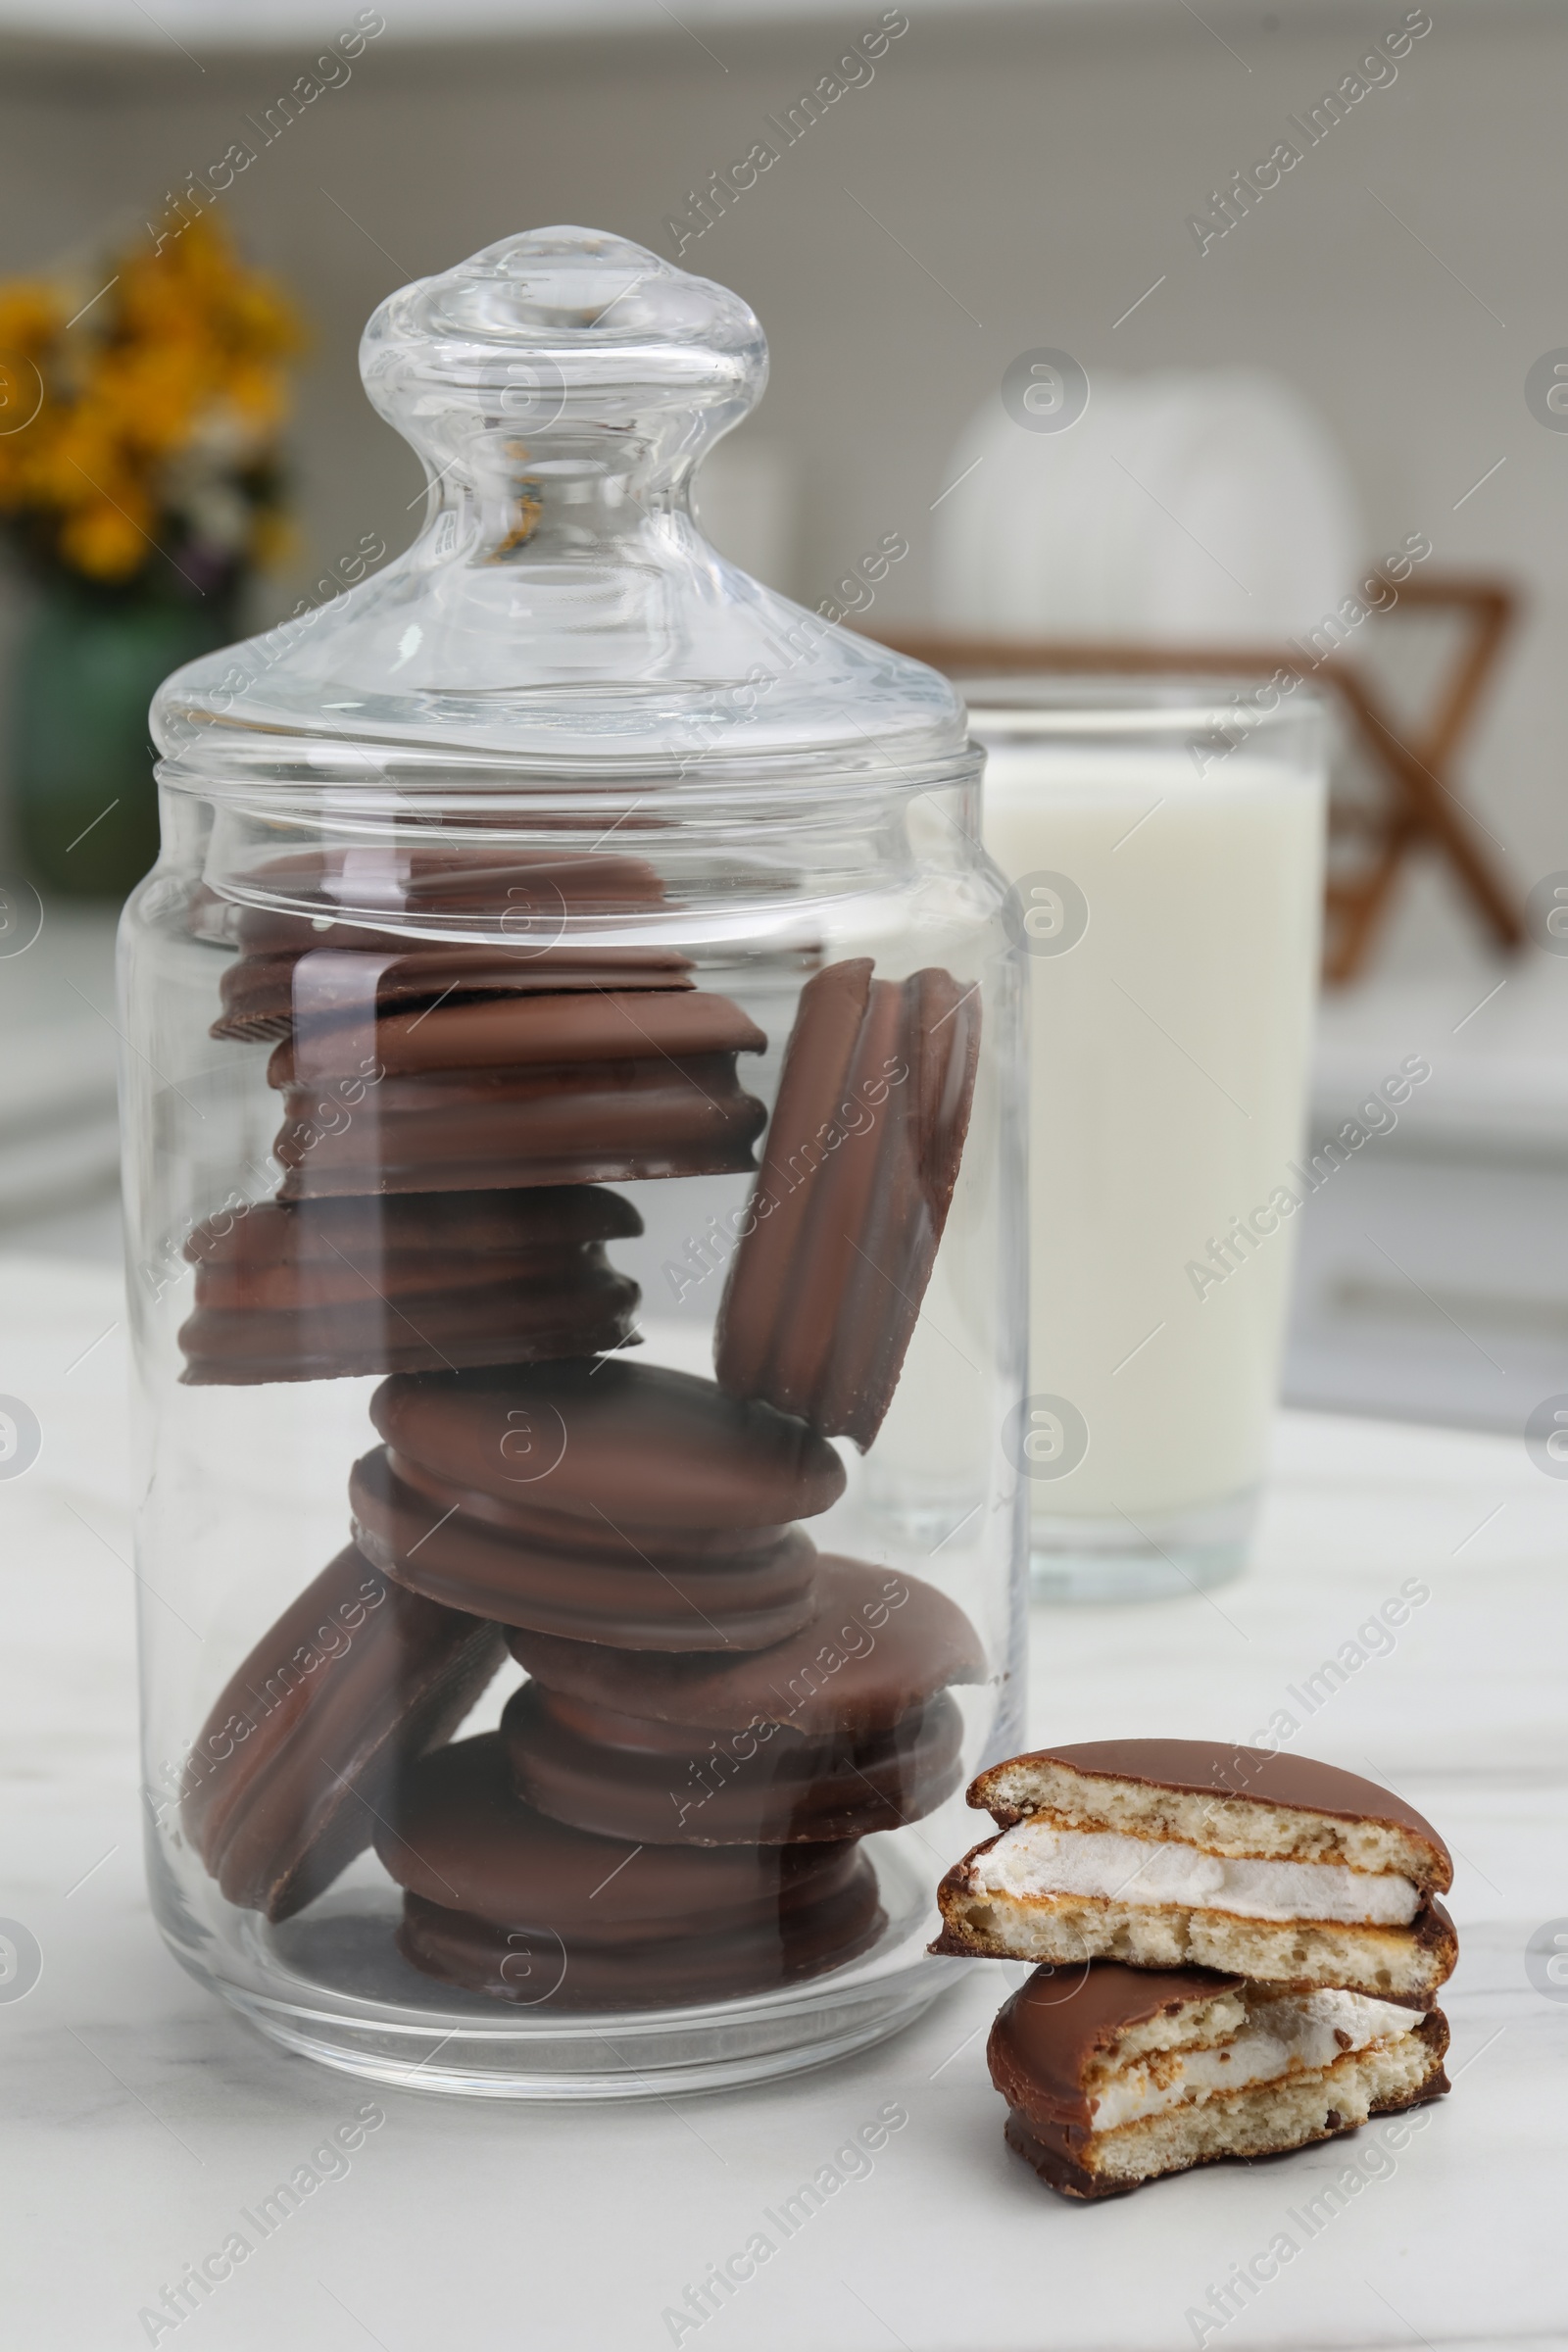 Photo of Jar with delicious choco pies and glass of milk on white table in kitchen